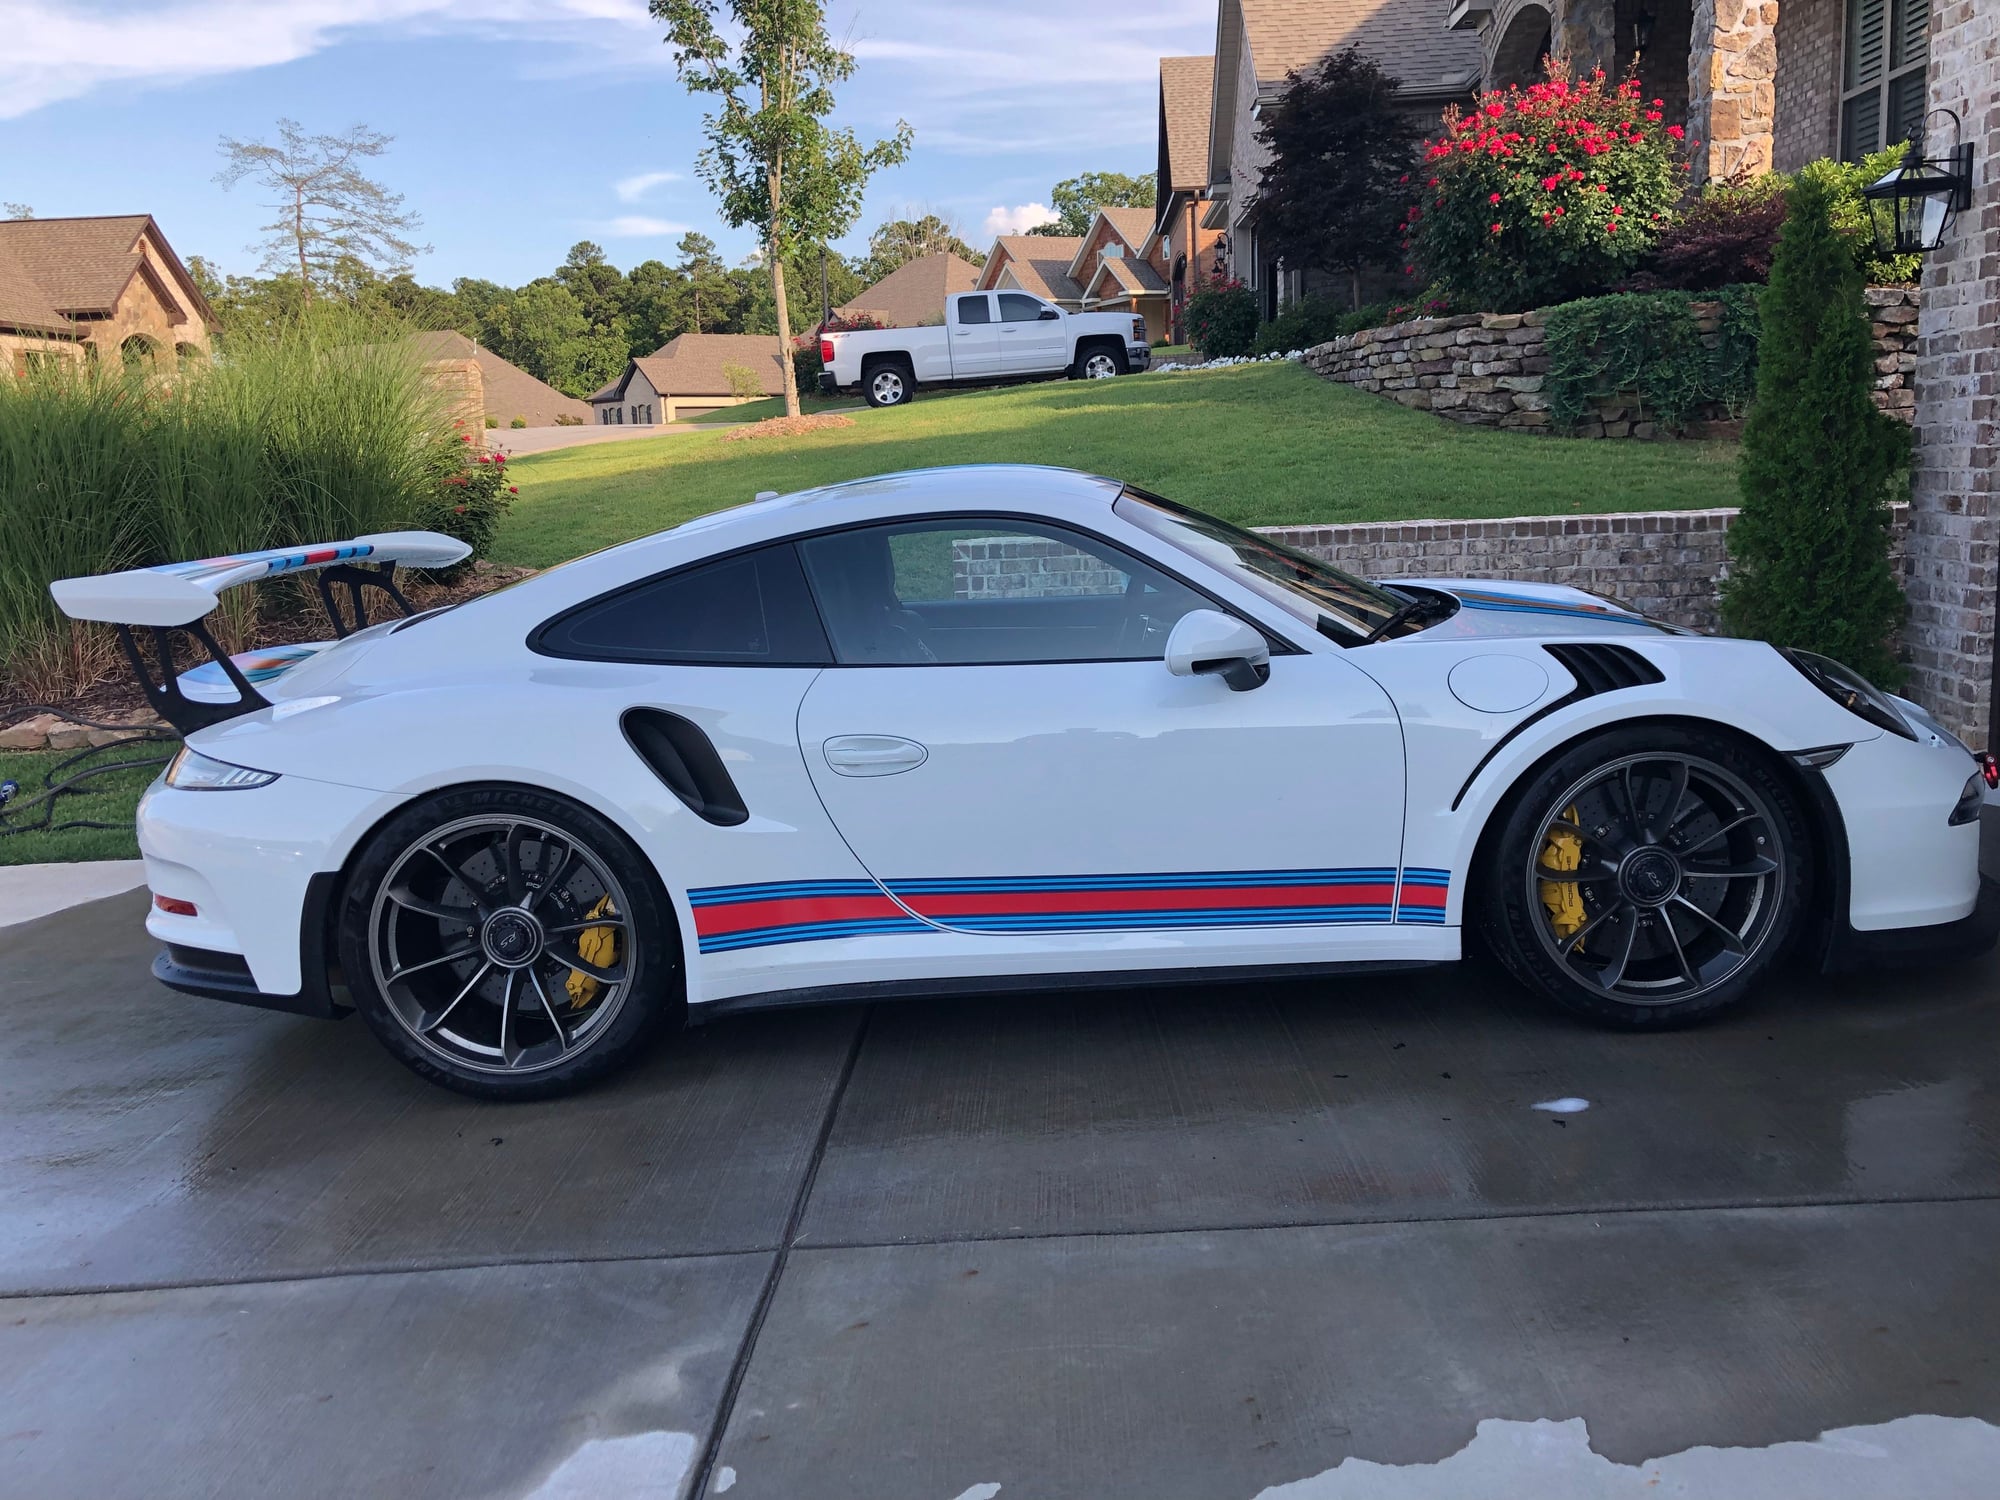 2016 Porsche GT3 - 2016 Porsche GT3 RS Martini Livery PCCB excellent - Used - VIN WPOAF2A92GS192502 - 6,900 Miles - Little Rock, AR 72223, United States